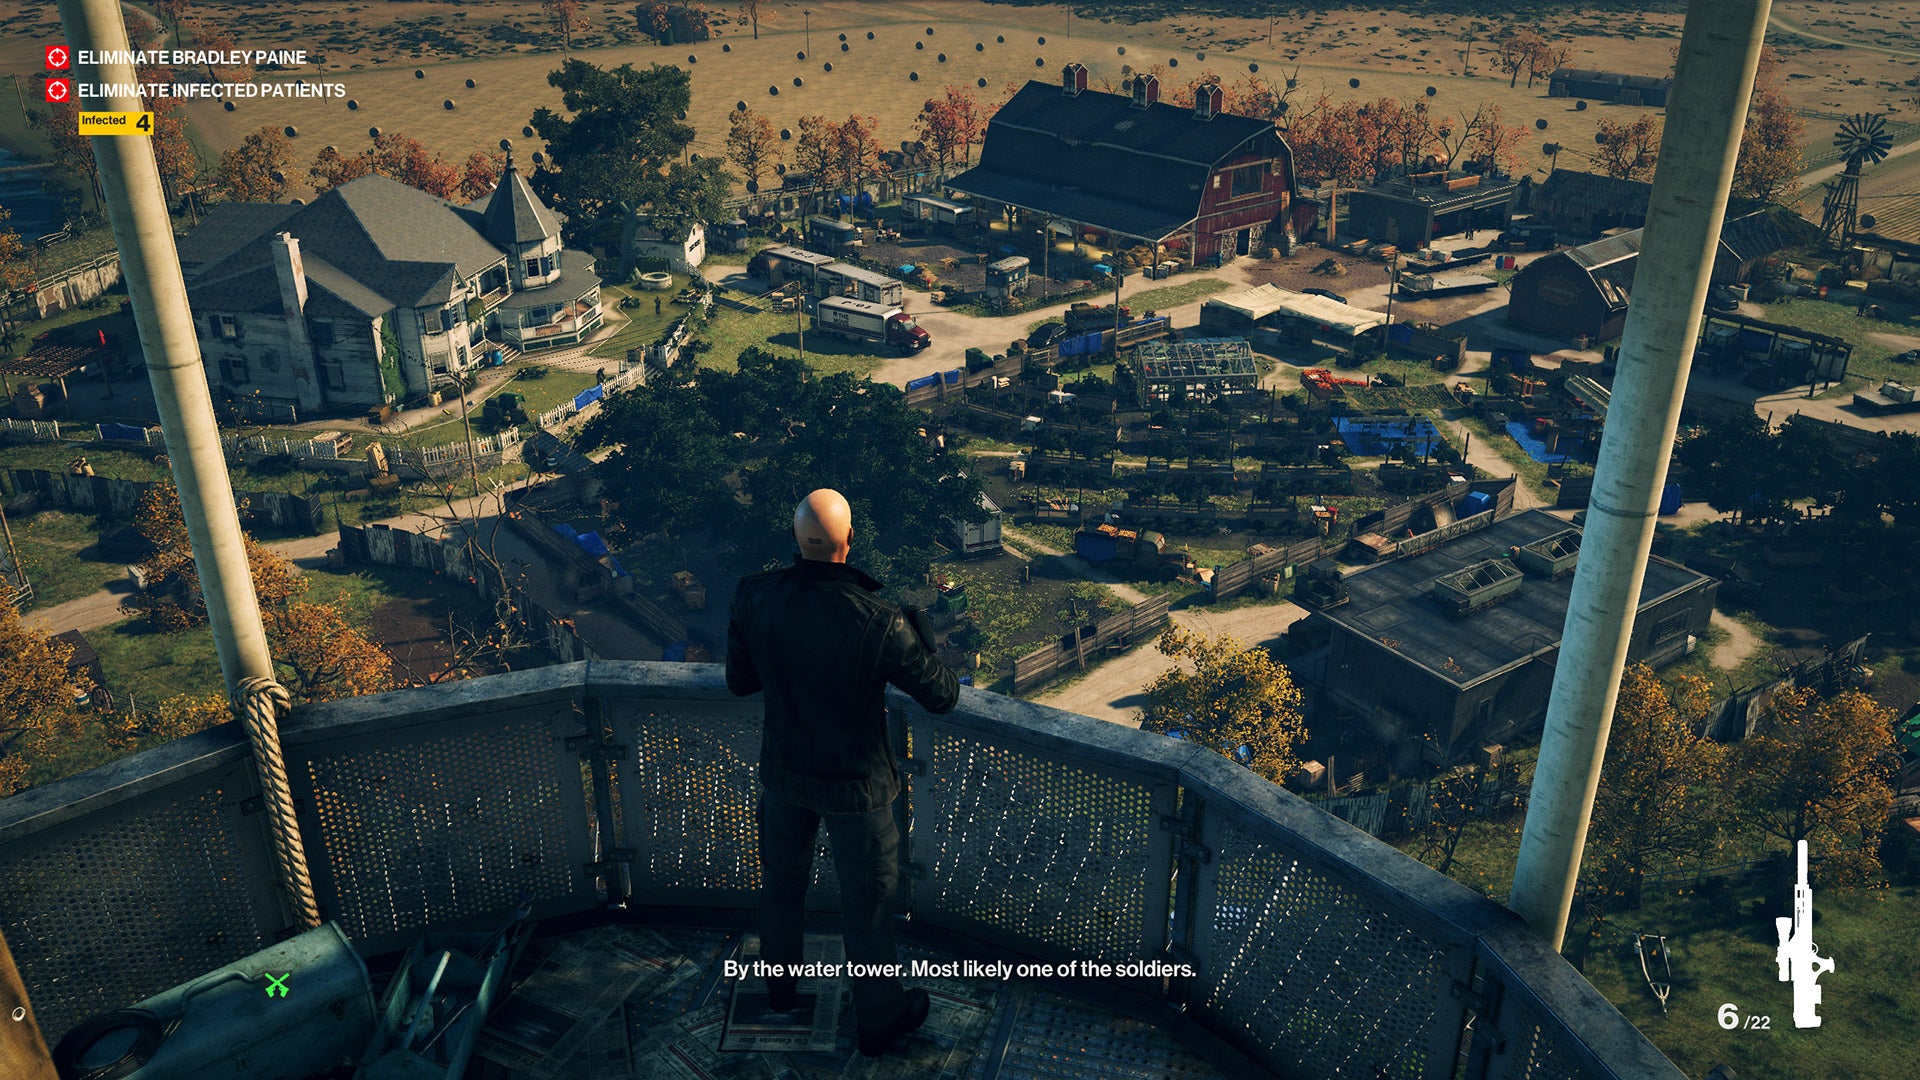 Agent 47 stands in a tower overlooking a slightly sus looking farm in the Colorado level. It is evident that he is in a sniper's nest.